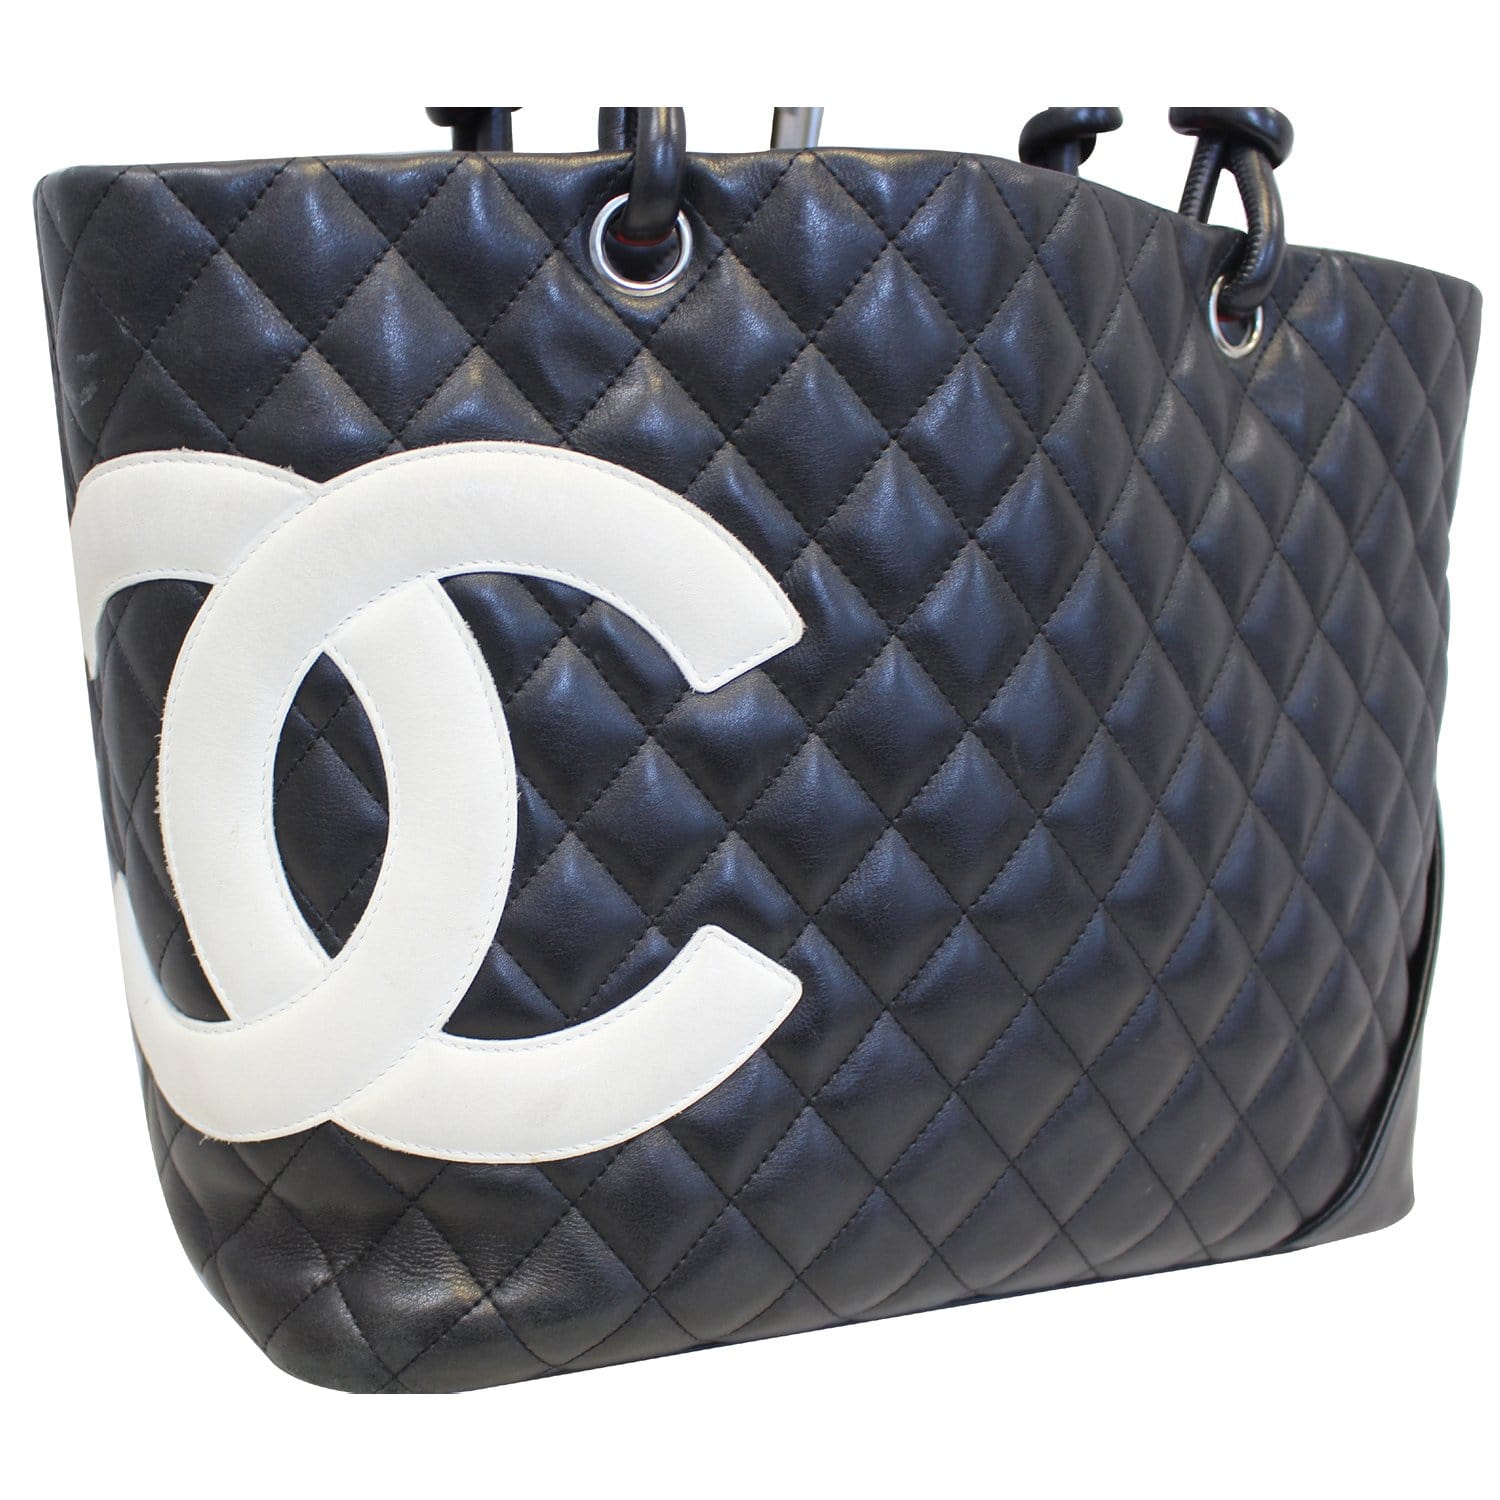 Chanel Black 2.55 Reissue Calfskin Leather Quilted Tote Bag